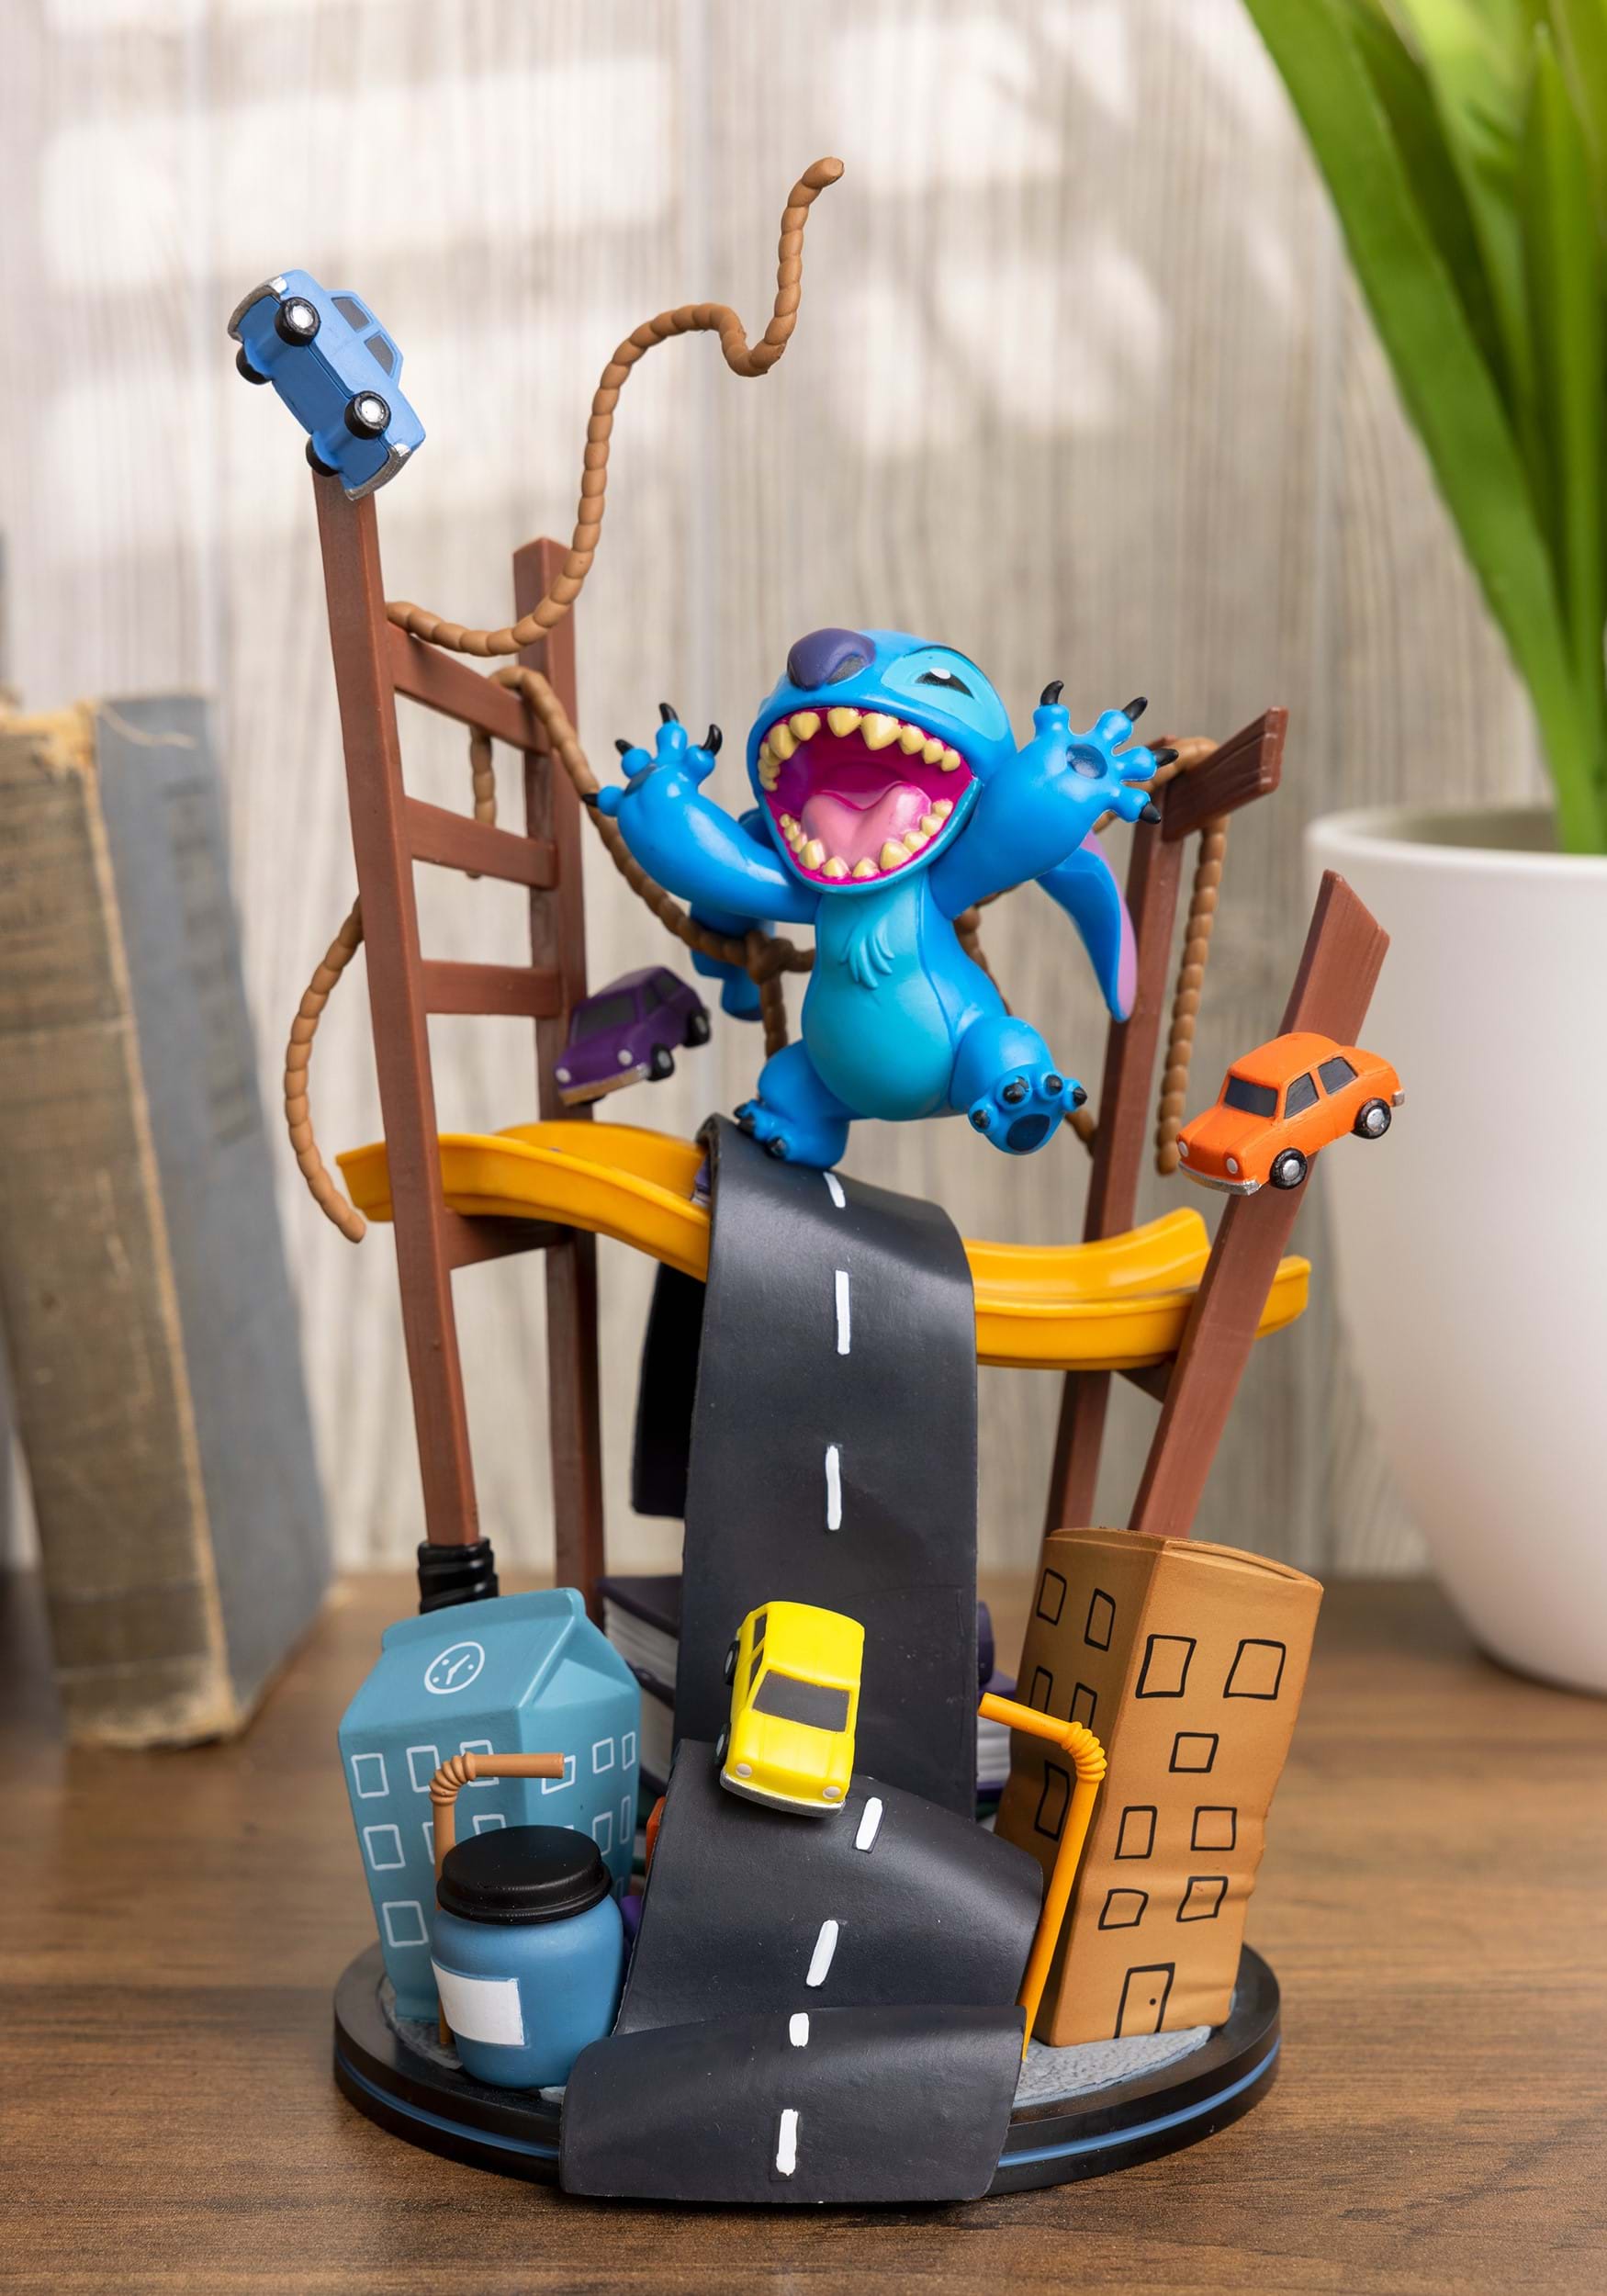 Fun.com Has Gifts For Fans of the NFL, Godzilla, Stitch, Snoopy